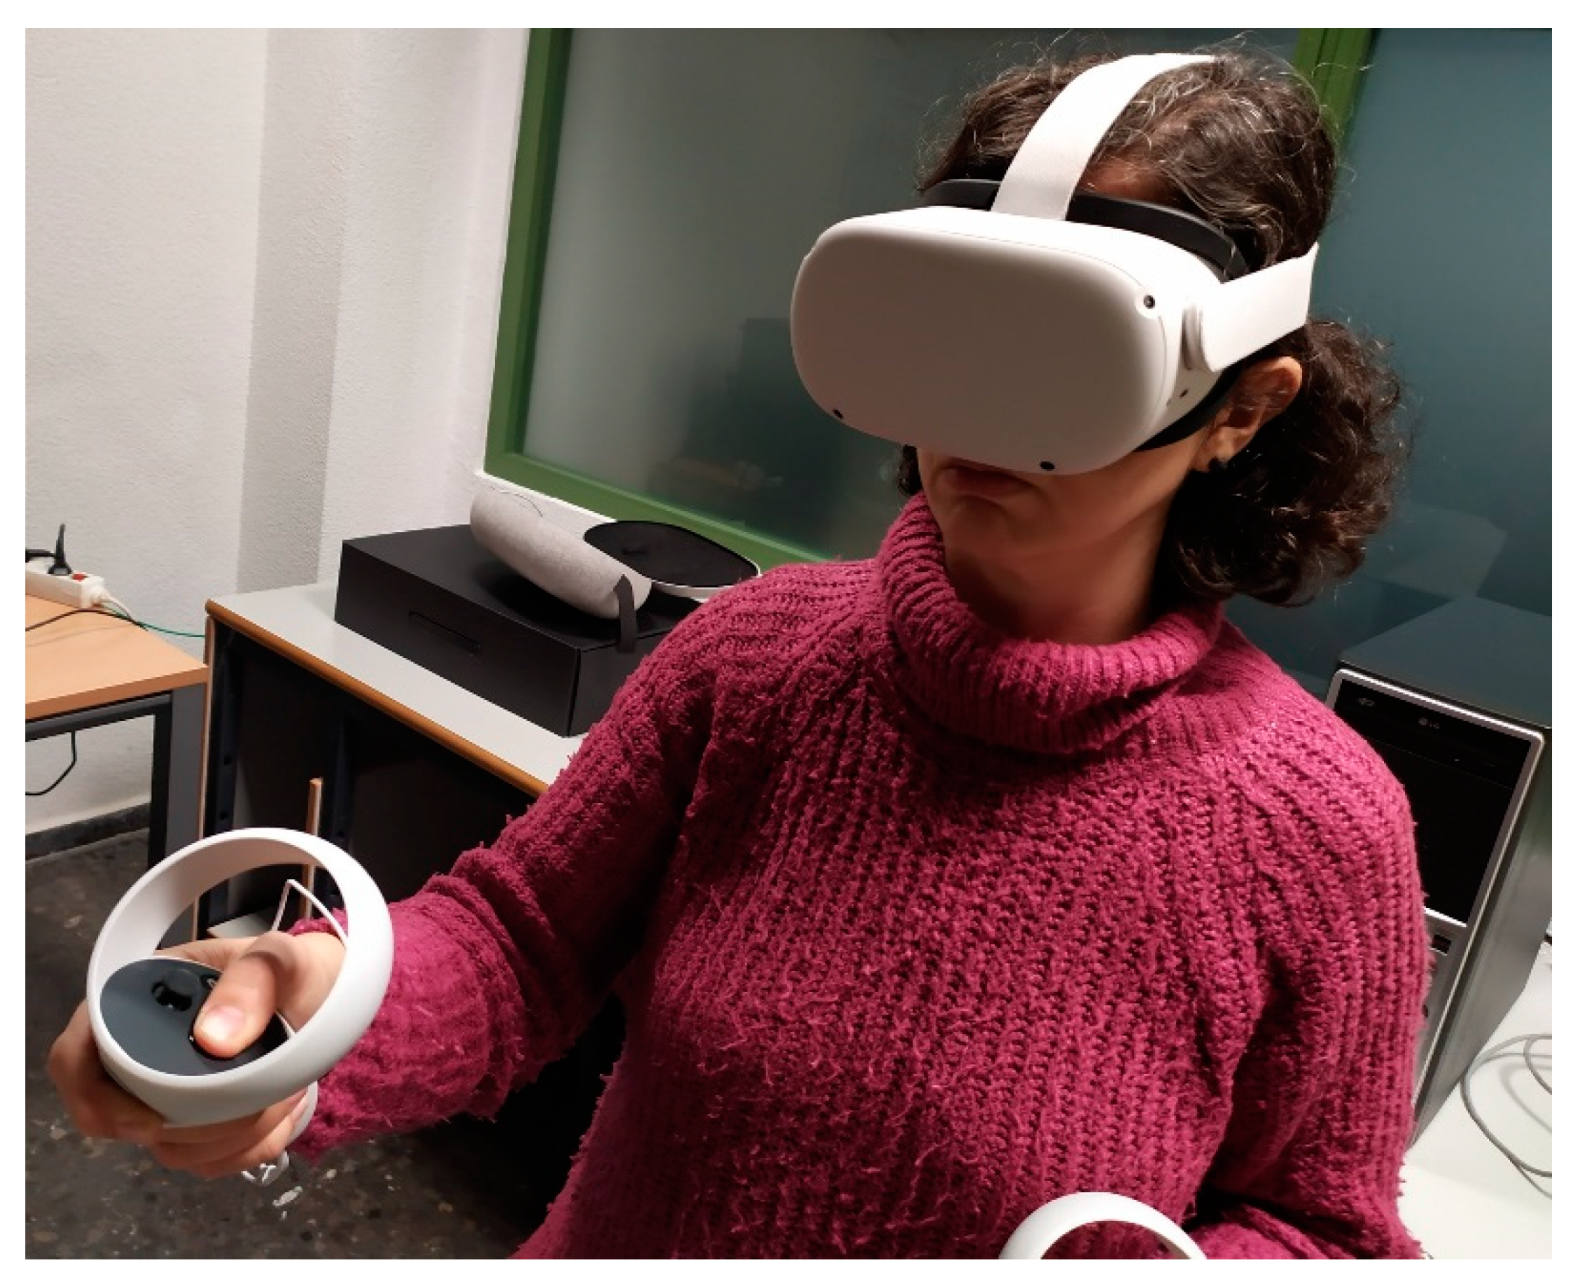 IJERPH | Free Full-Text | Development and Testing of a Portable Virtual Reality-Based Mirror Visual Feedback System with Behavioral Measures Monitoring